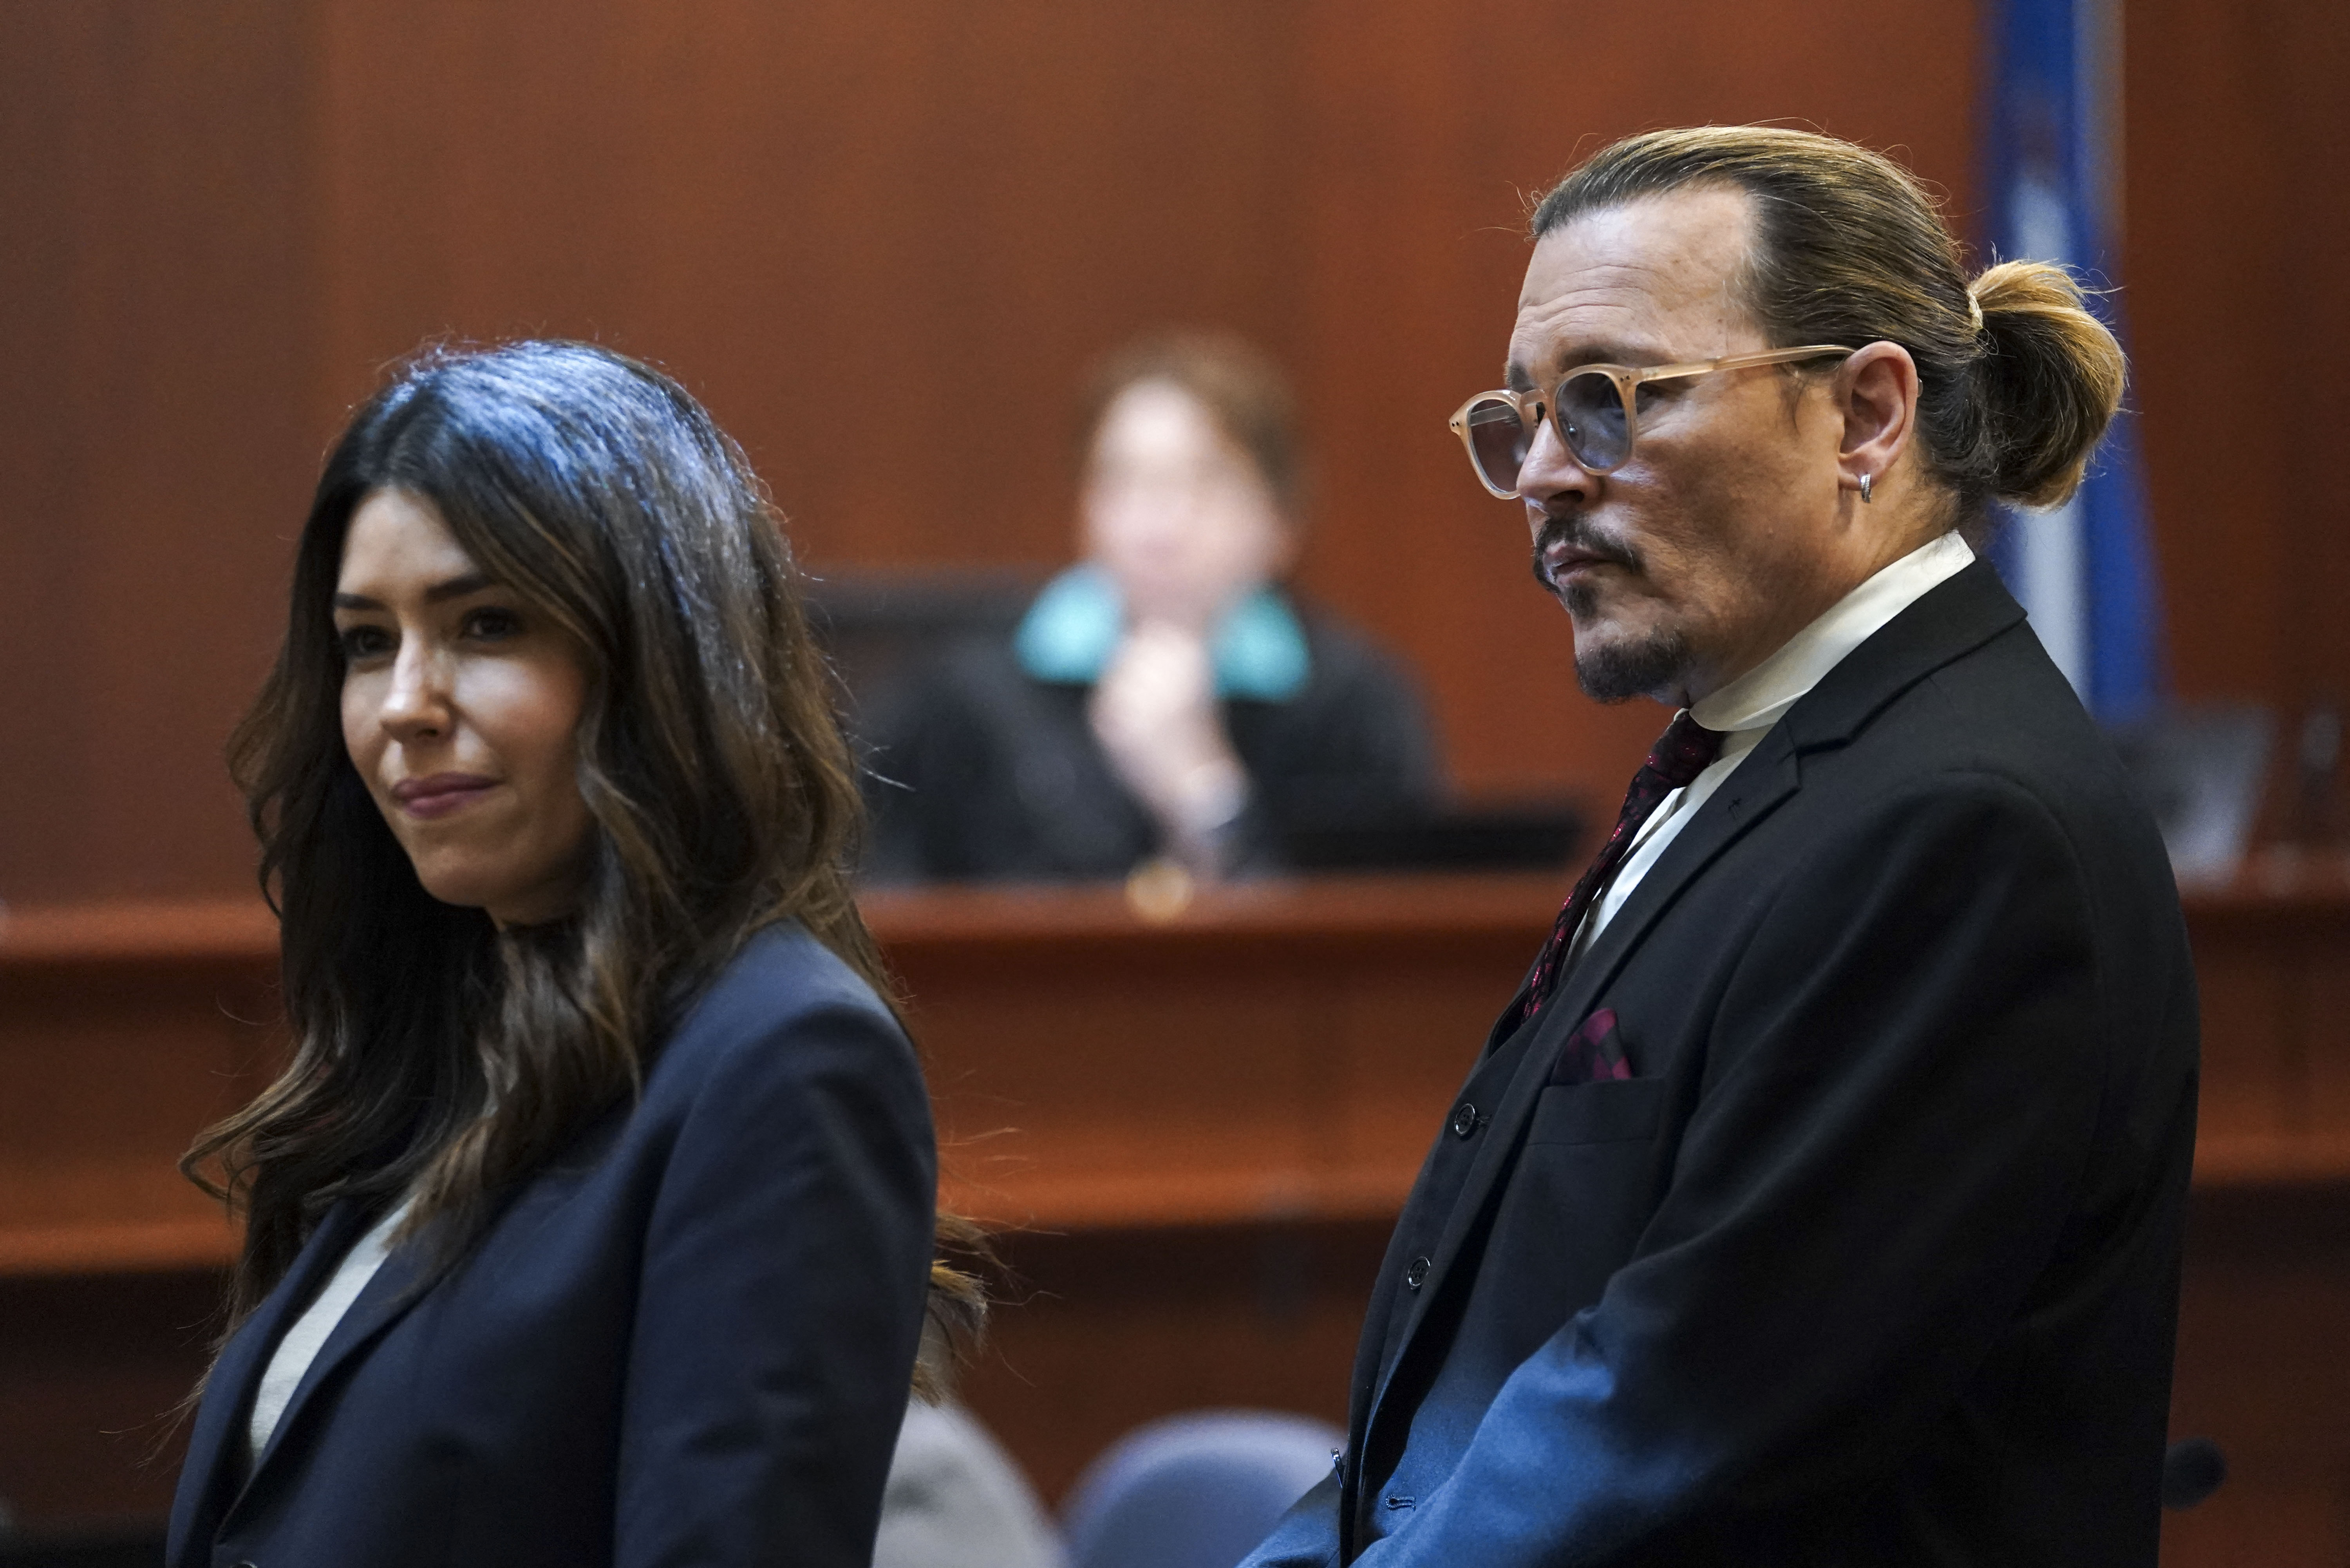 Johnny Depp standing next to his attorney Camille Vasquez during the defamation trial against ex-wife Amber Heard